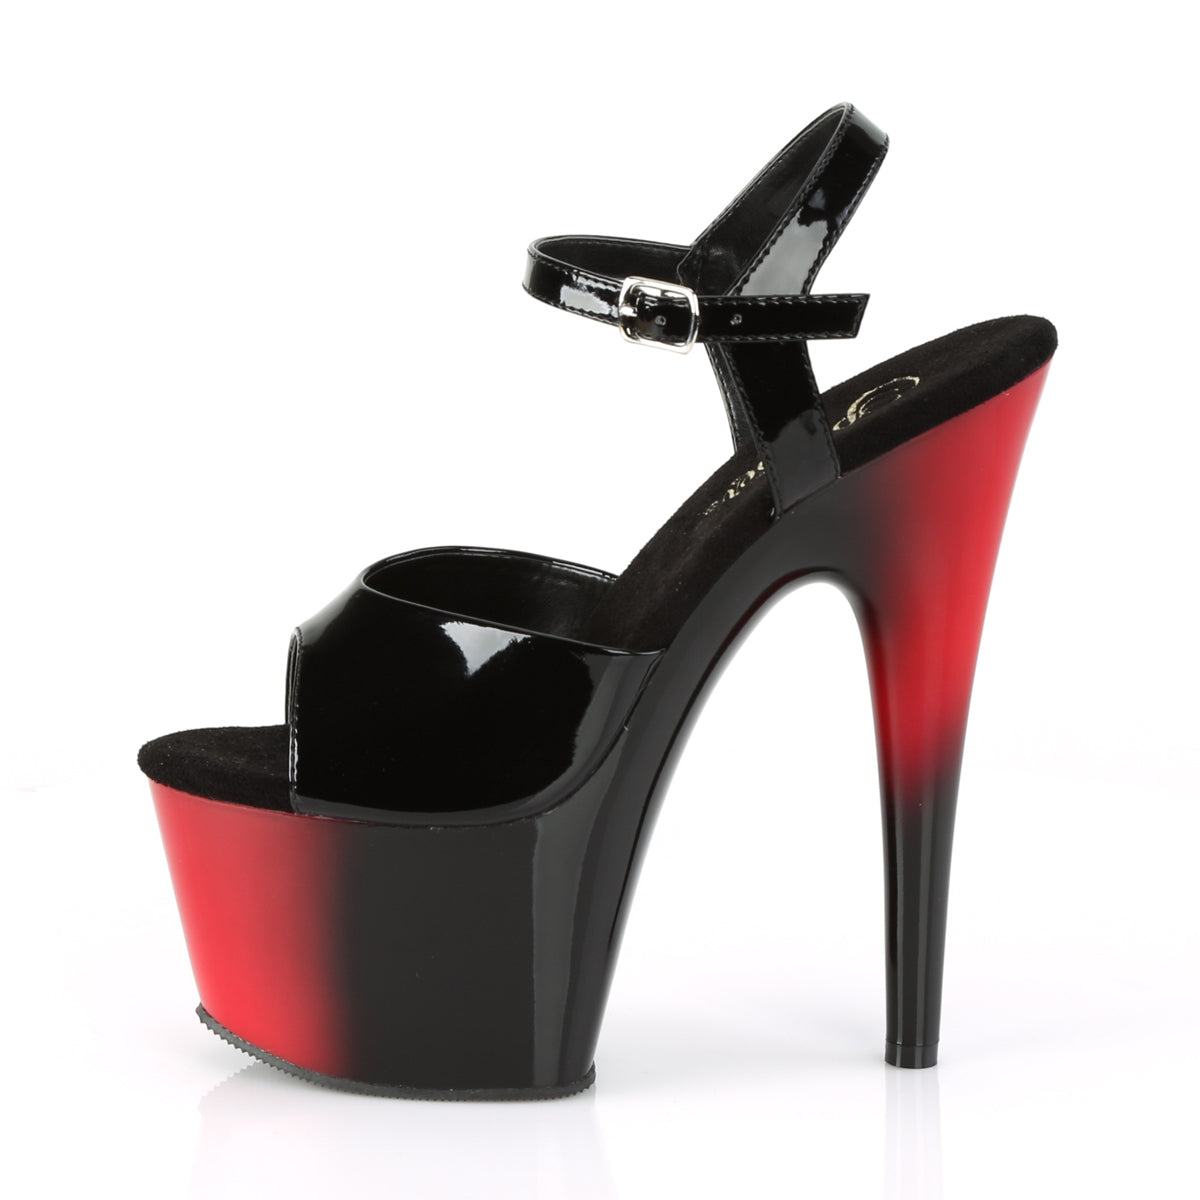 ADORE-709BR Pleaser 7" Heel Black and Red Pole Dancing Shoes-Pleaser- Sexy Shoes Pole Dance Heels